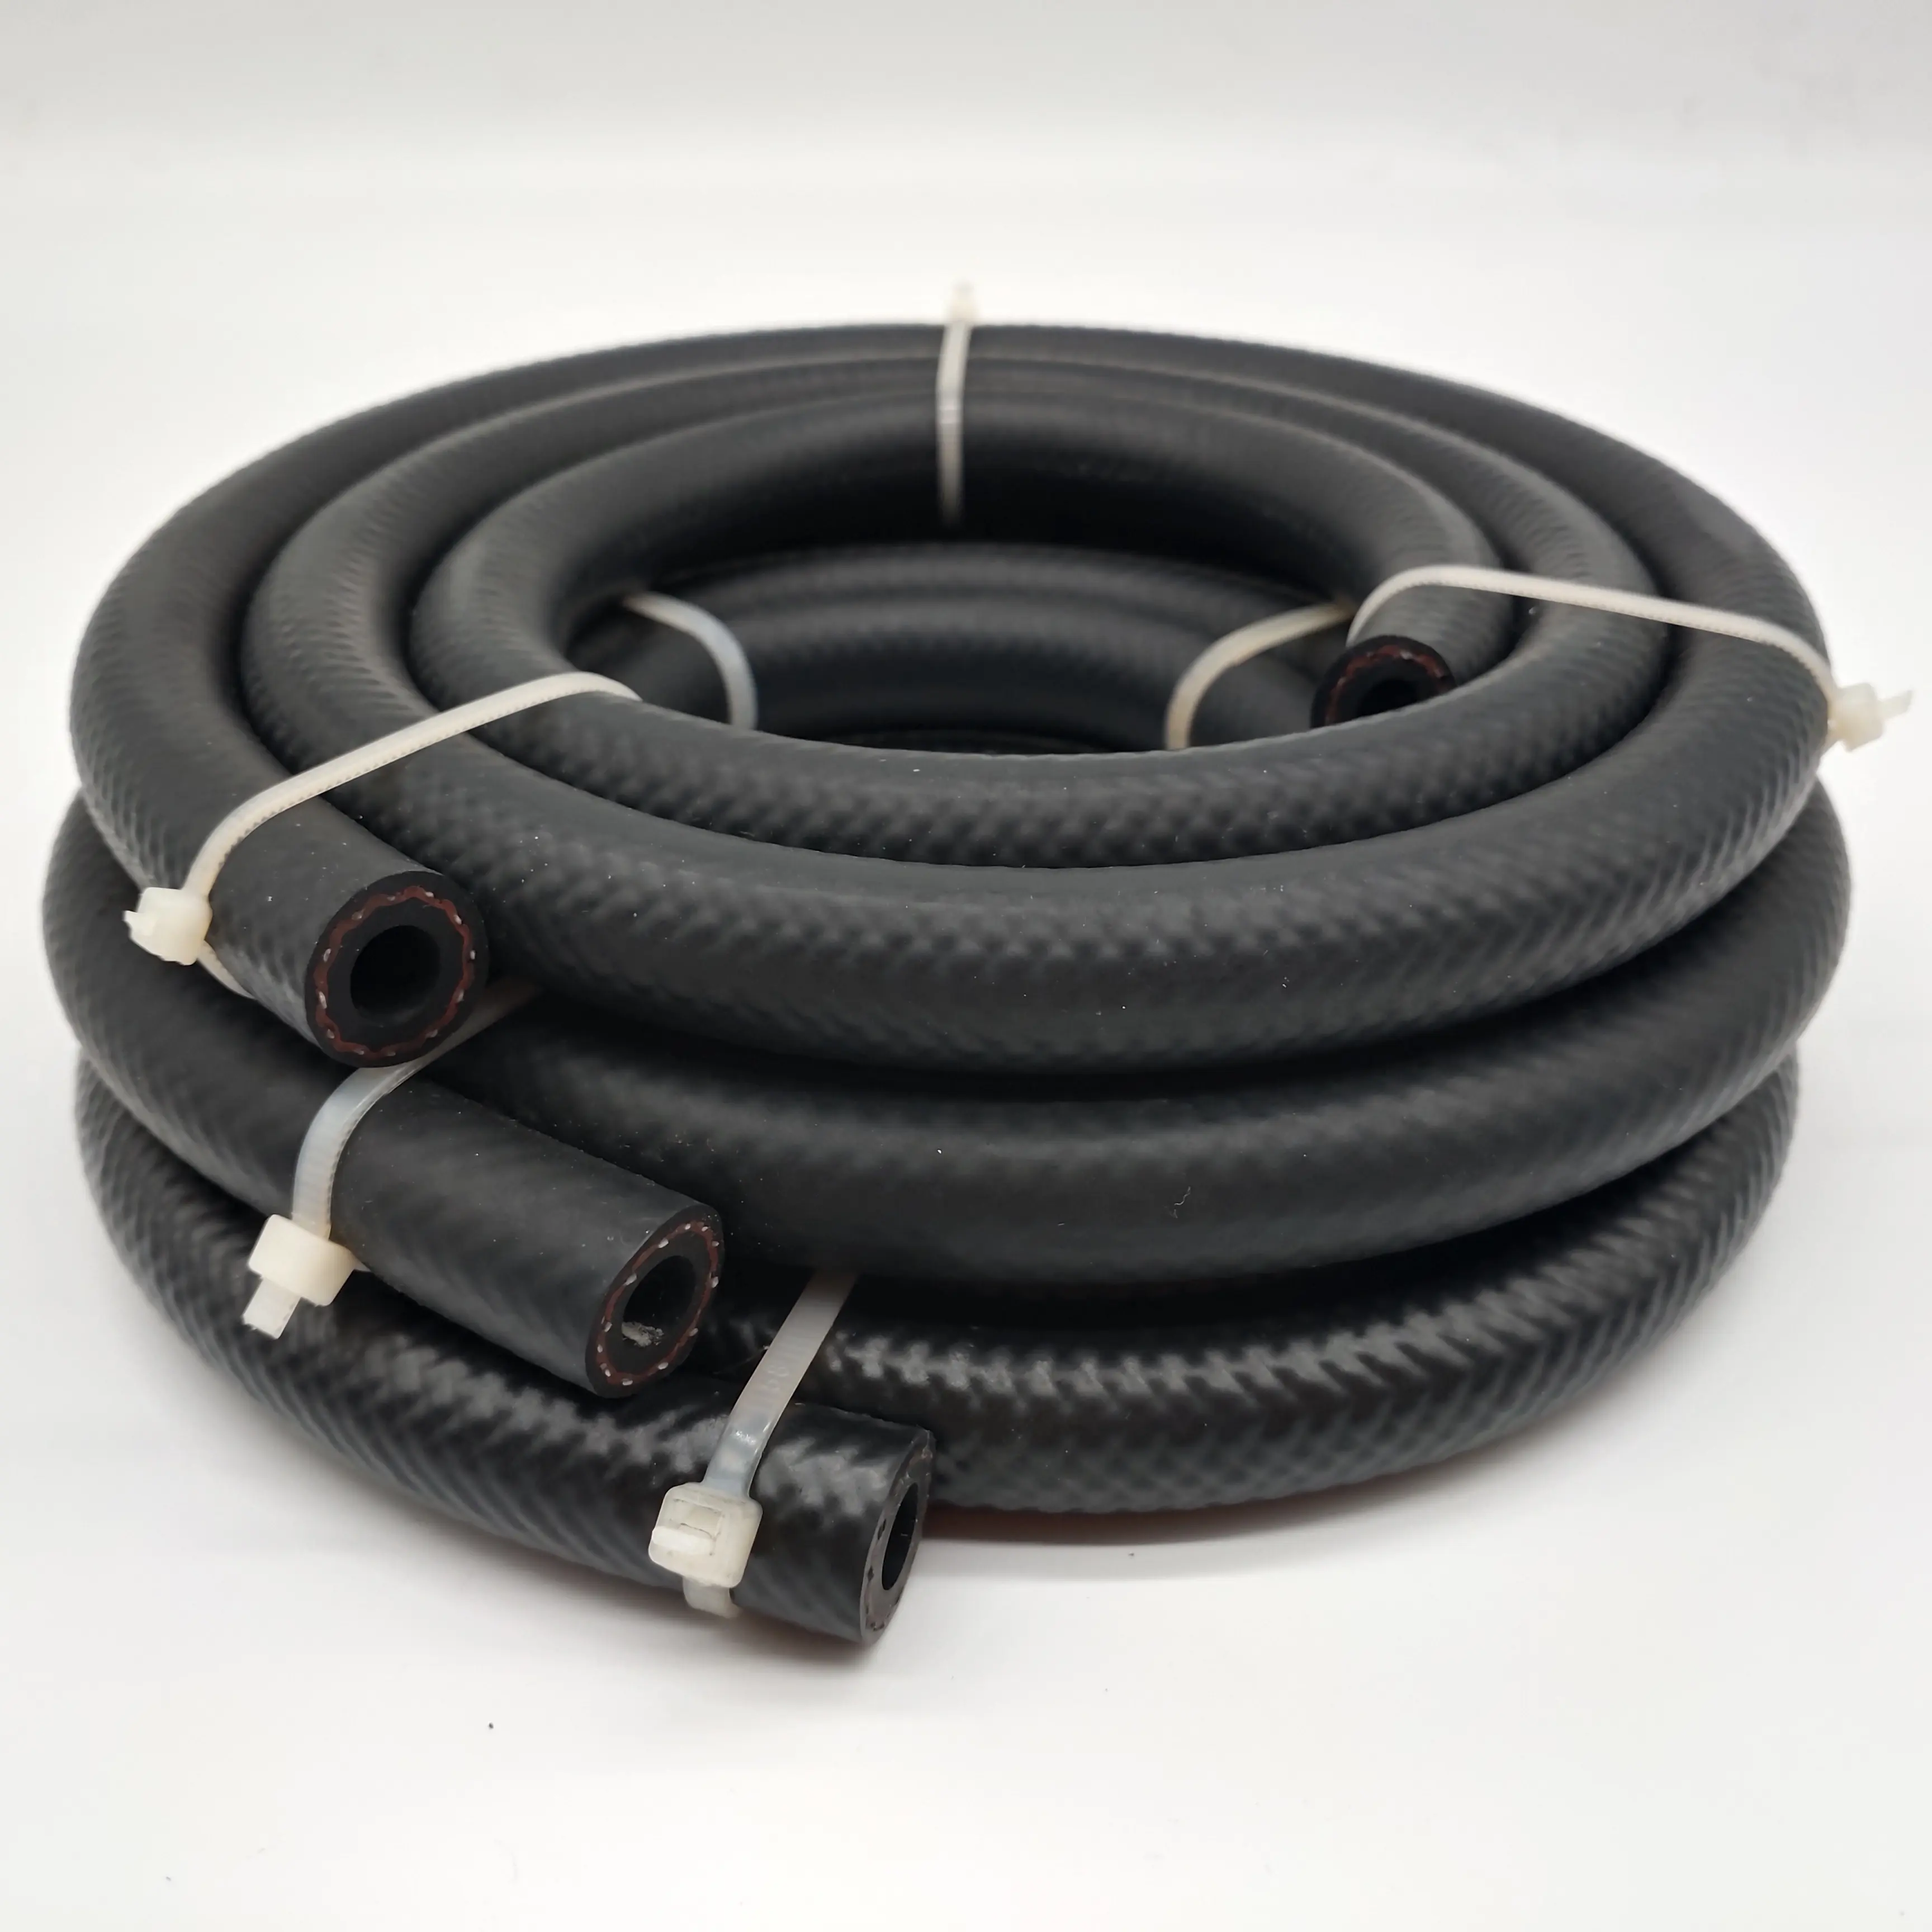 High pressure smooth surface PSI 300 hydraulic rubber NBR braided oil hose 1/2" 1/8'' 5/16" 3/8" sizes for fuel /cooling system